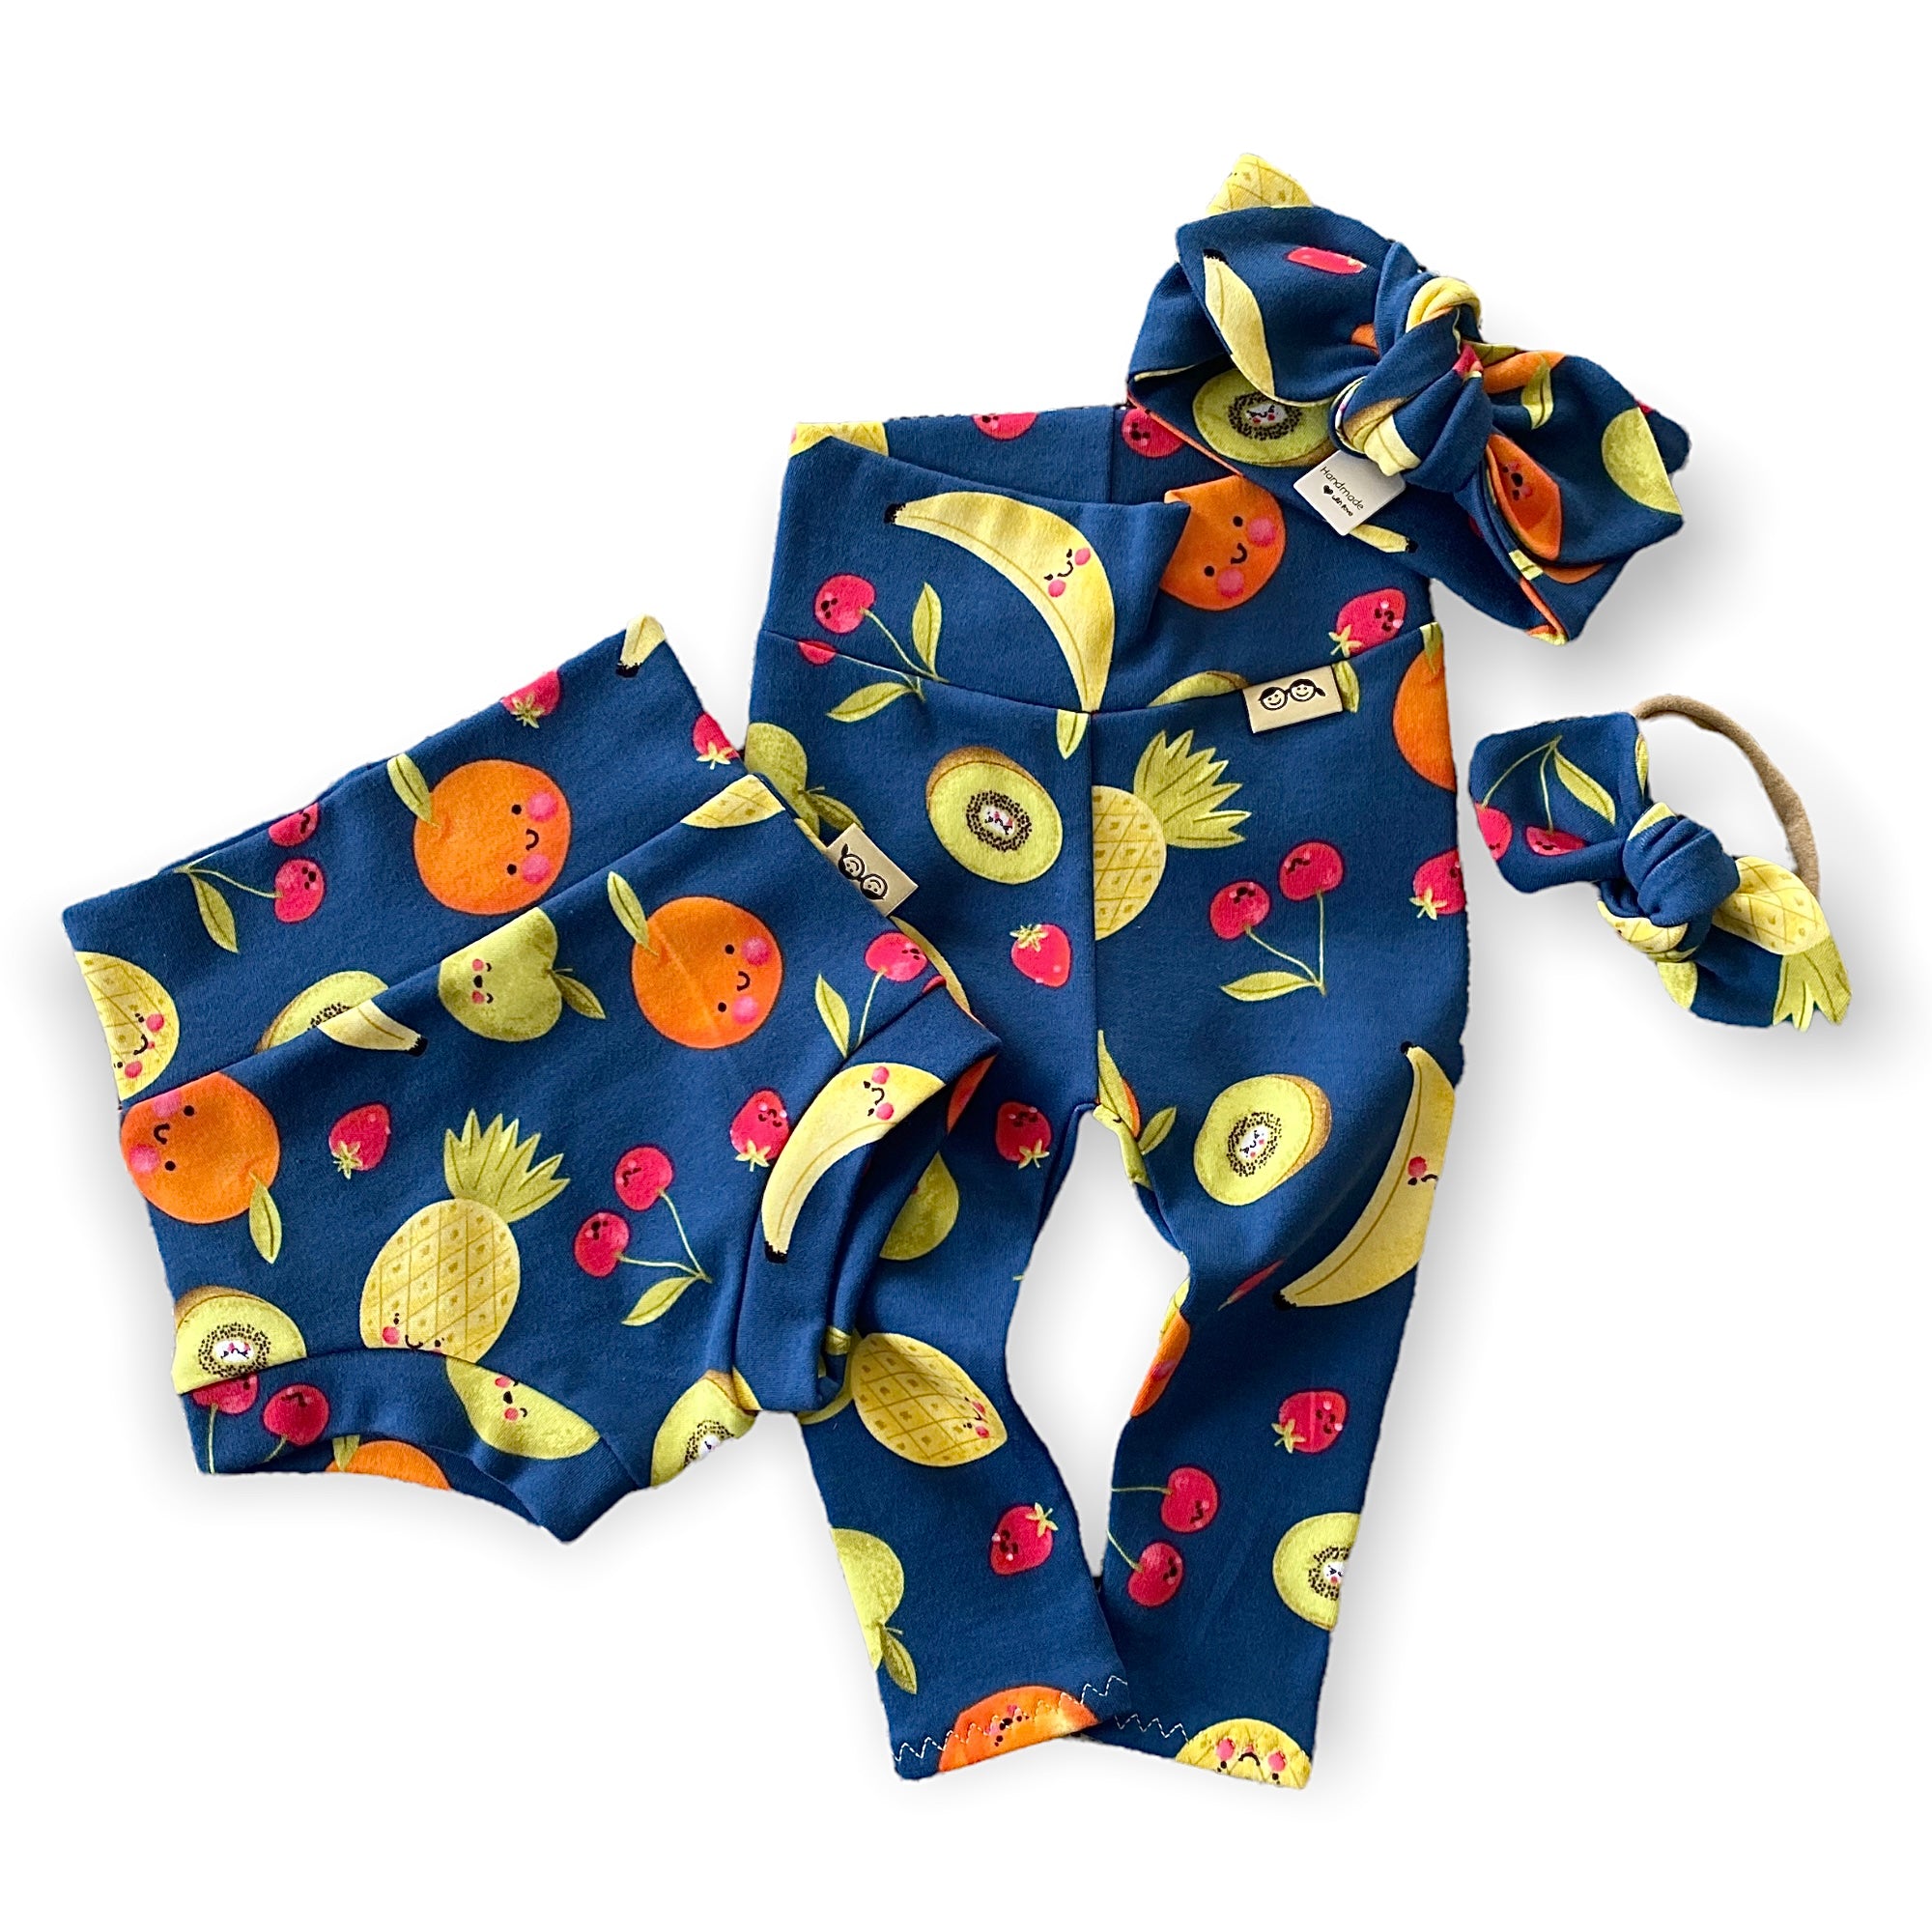 Fun Fruits on Blue Leggings and/or Headbands